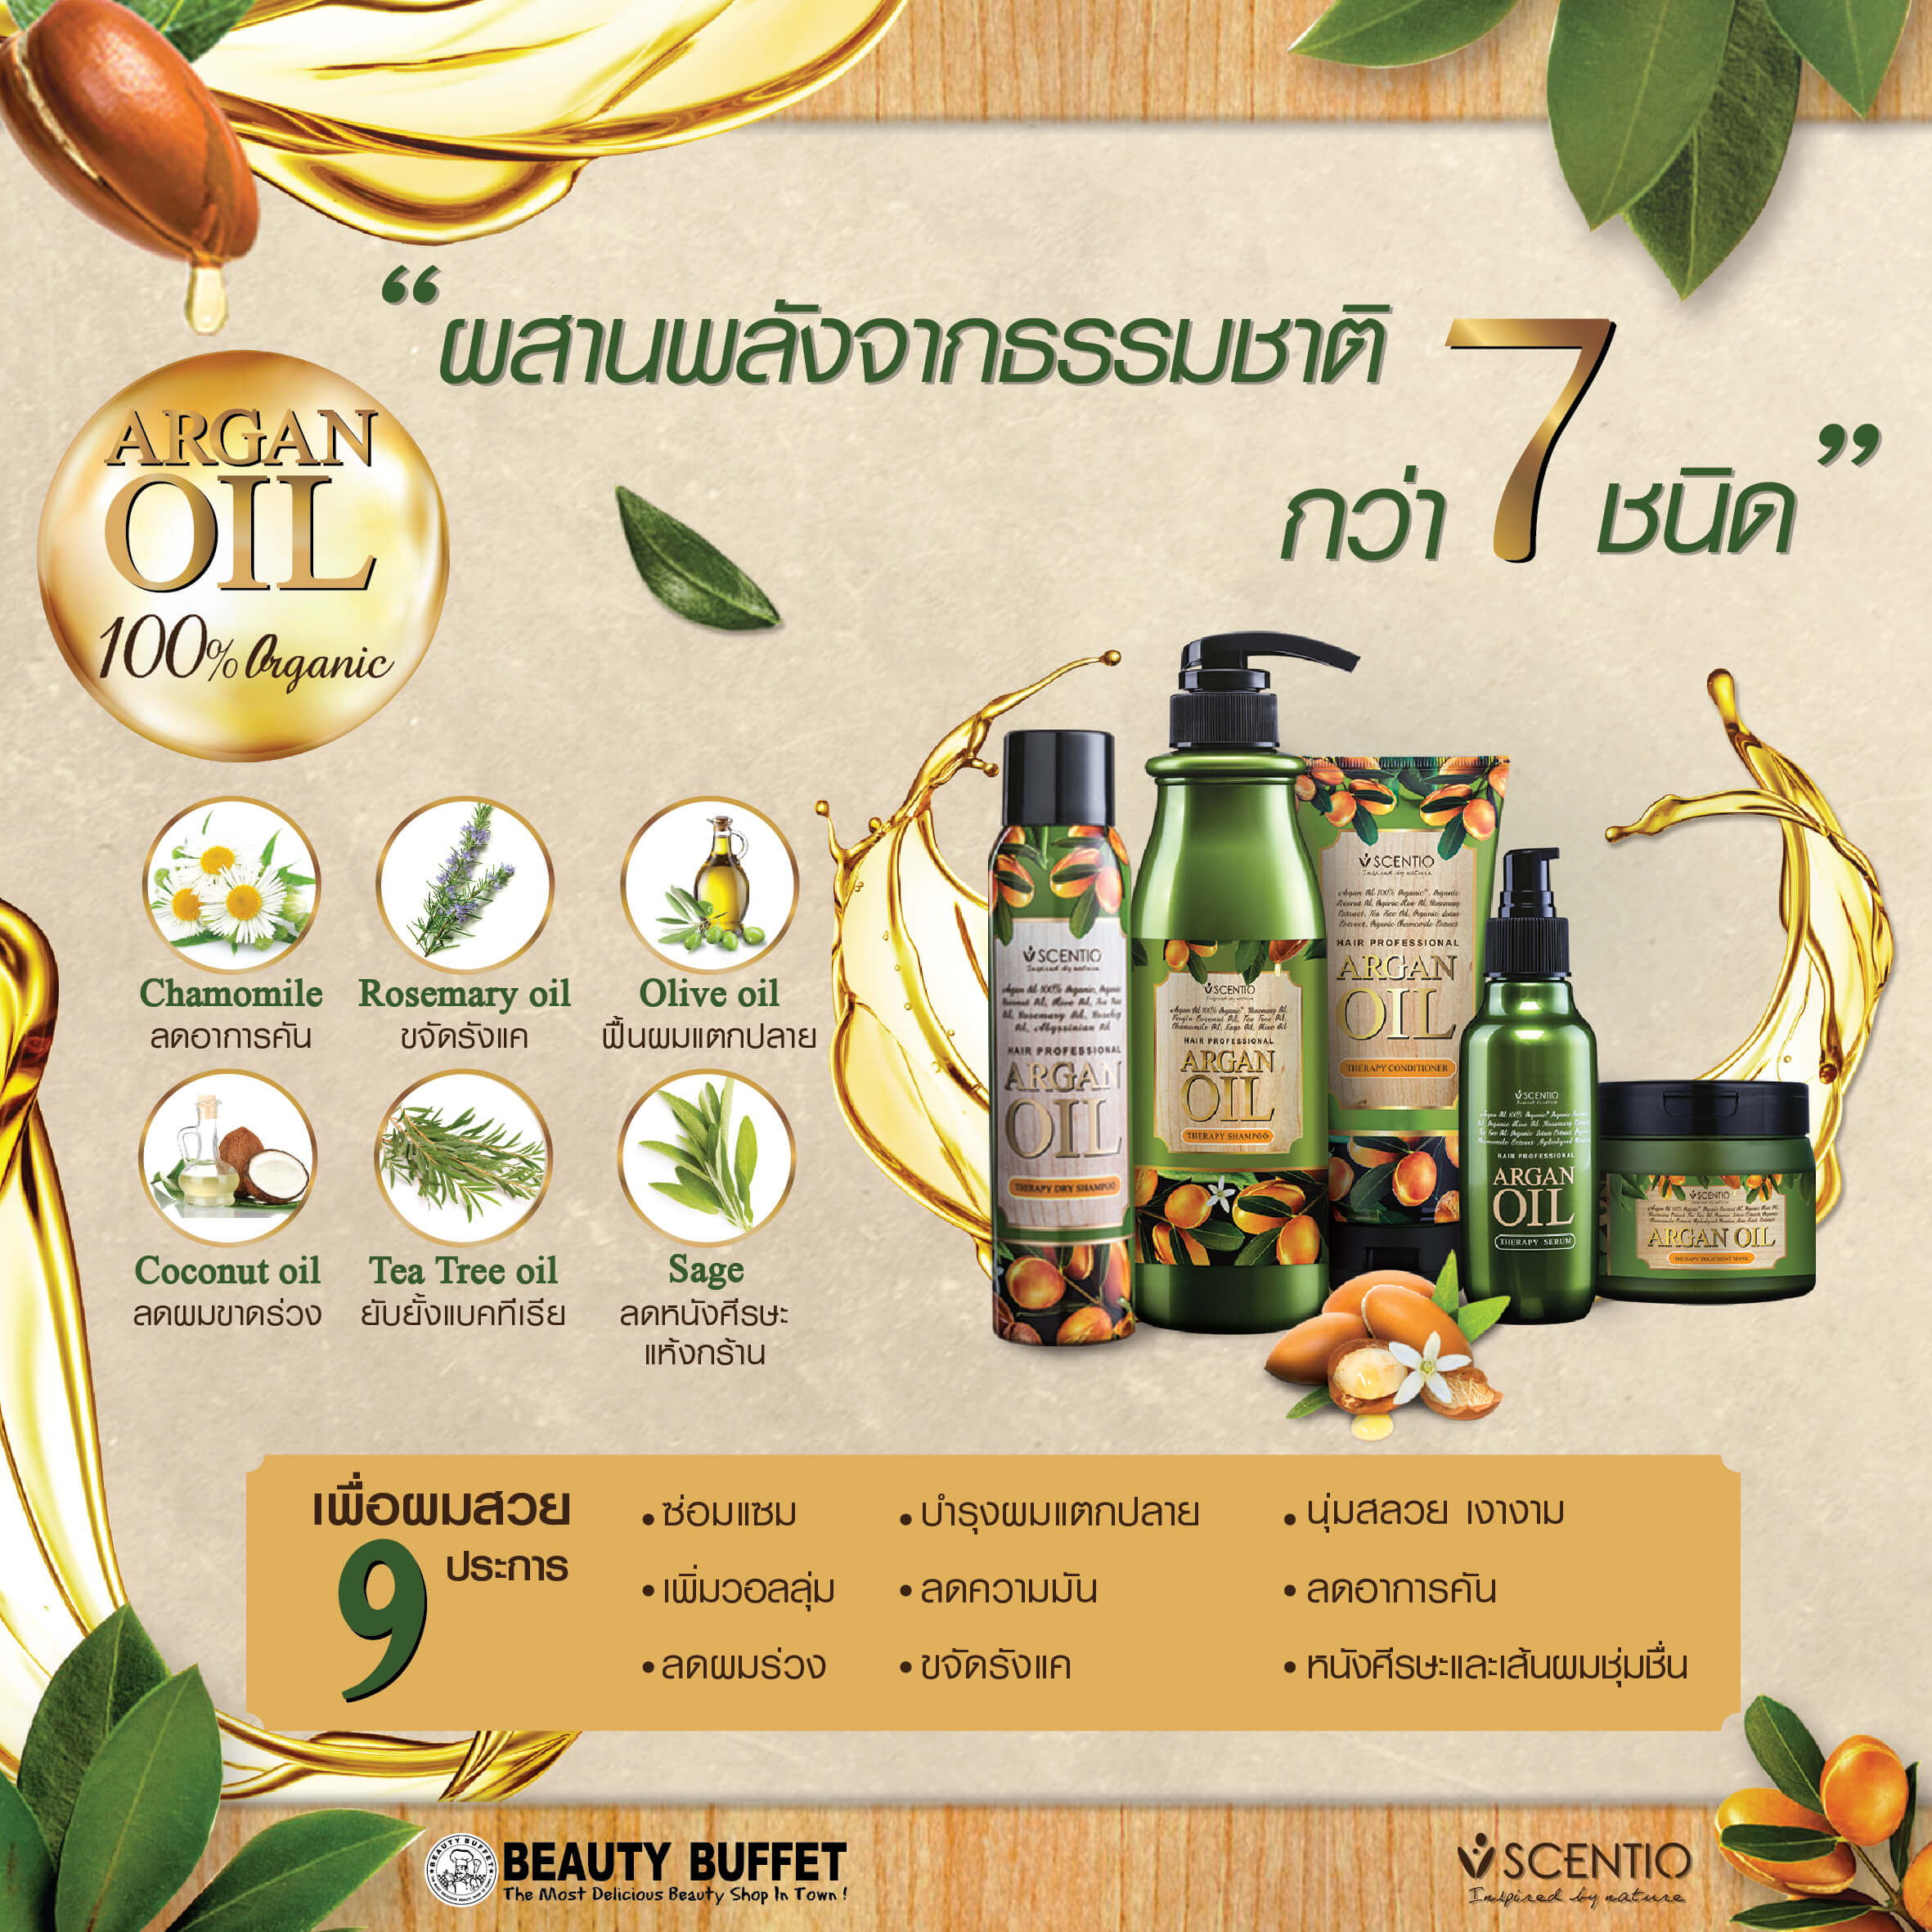 SCENTIO HAIR PROFESSIONAL ARGAN OIL THERAPY , SCENTIO HAIR PROFESSIONAL ARGAN OIL THERAPY SHAMPOO , SCENTIO HAIR PROFESSIONAL ARGAN OIL THERAPY CONDITIONER , SCENTIO HAIR PROFESSIONAL ARGAN OIL THERAPY TREATMENT MASK , SCENTIO HAIR PROFESSIONAL ARGAN OIL THERAPY SERUM